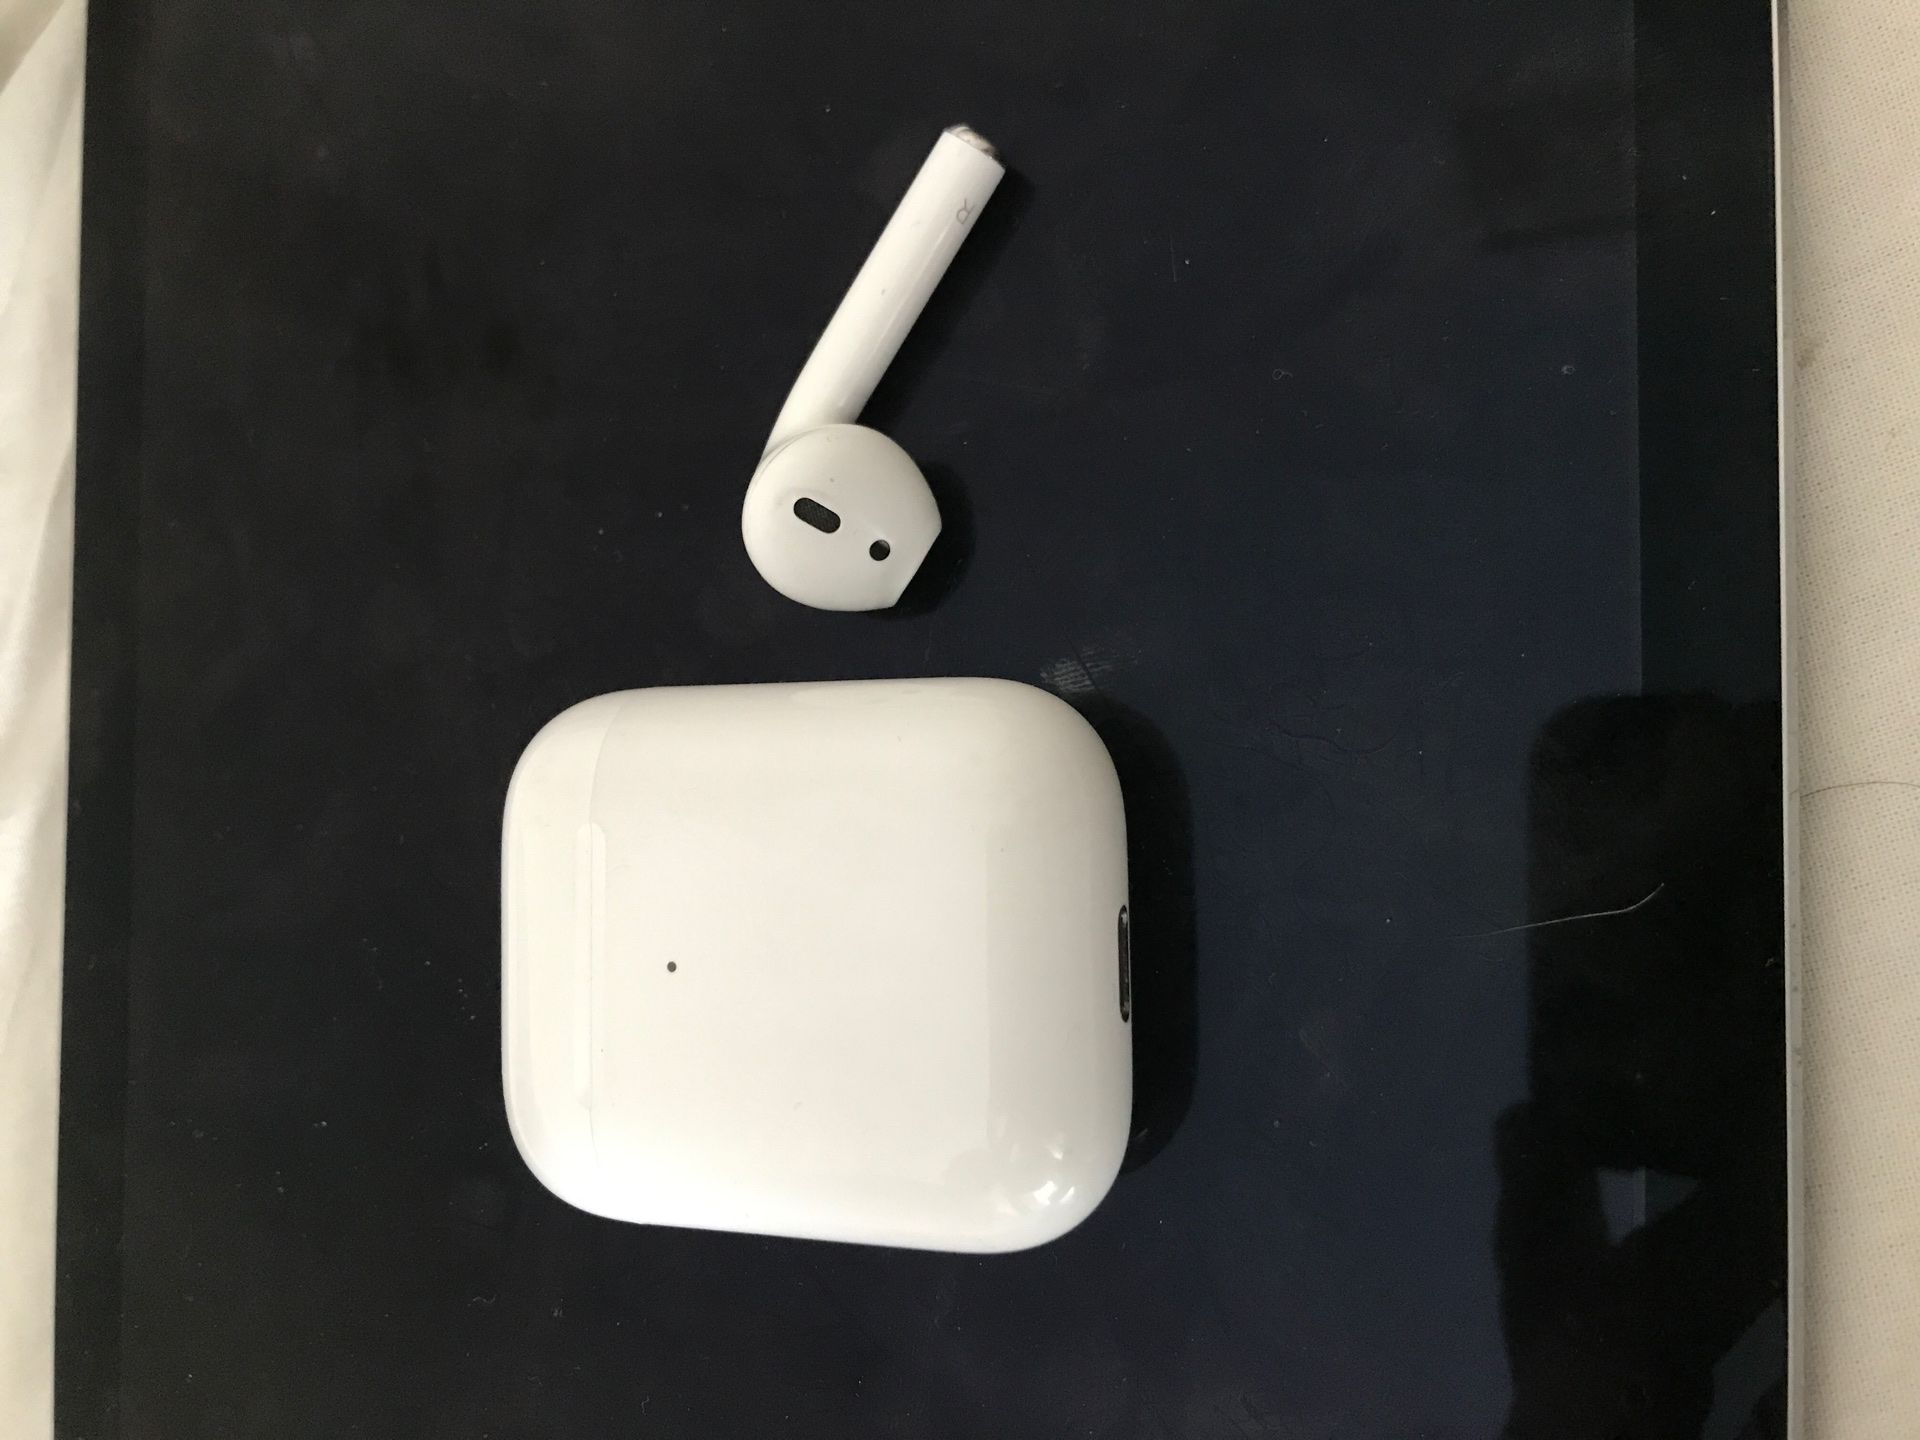 AirPods 2 - no left earbud - ORIGINAL PRODUCT!